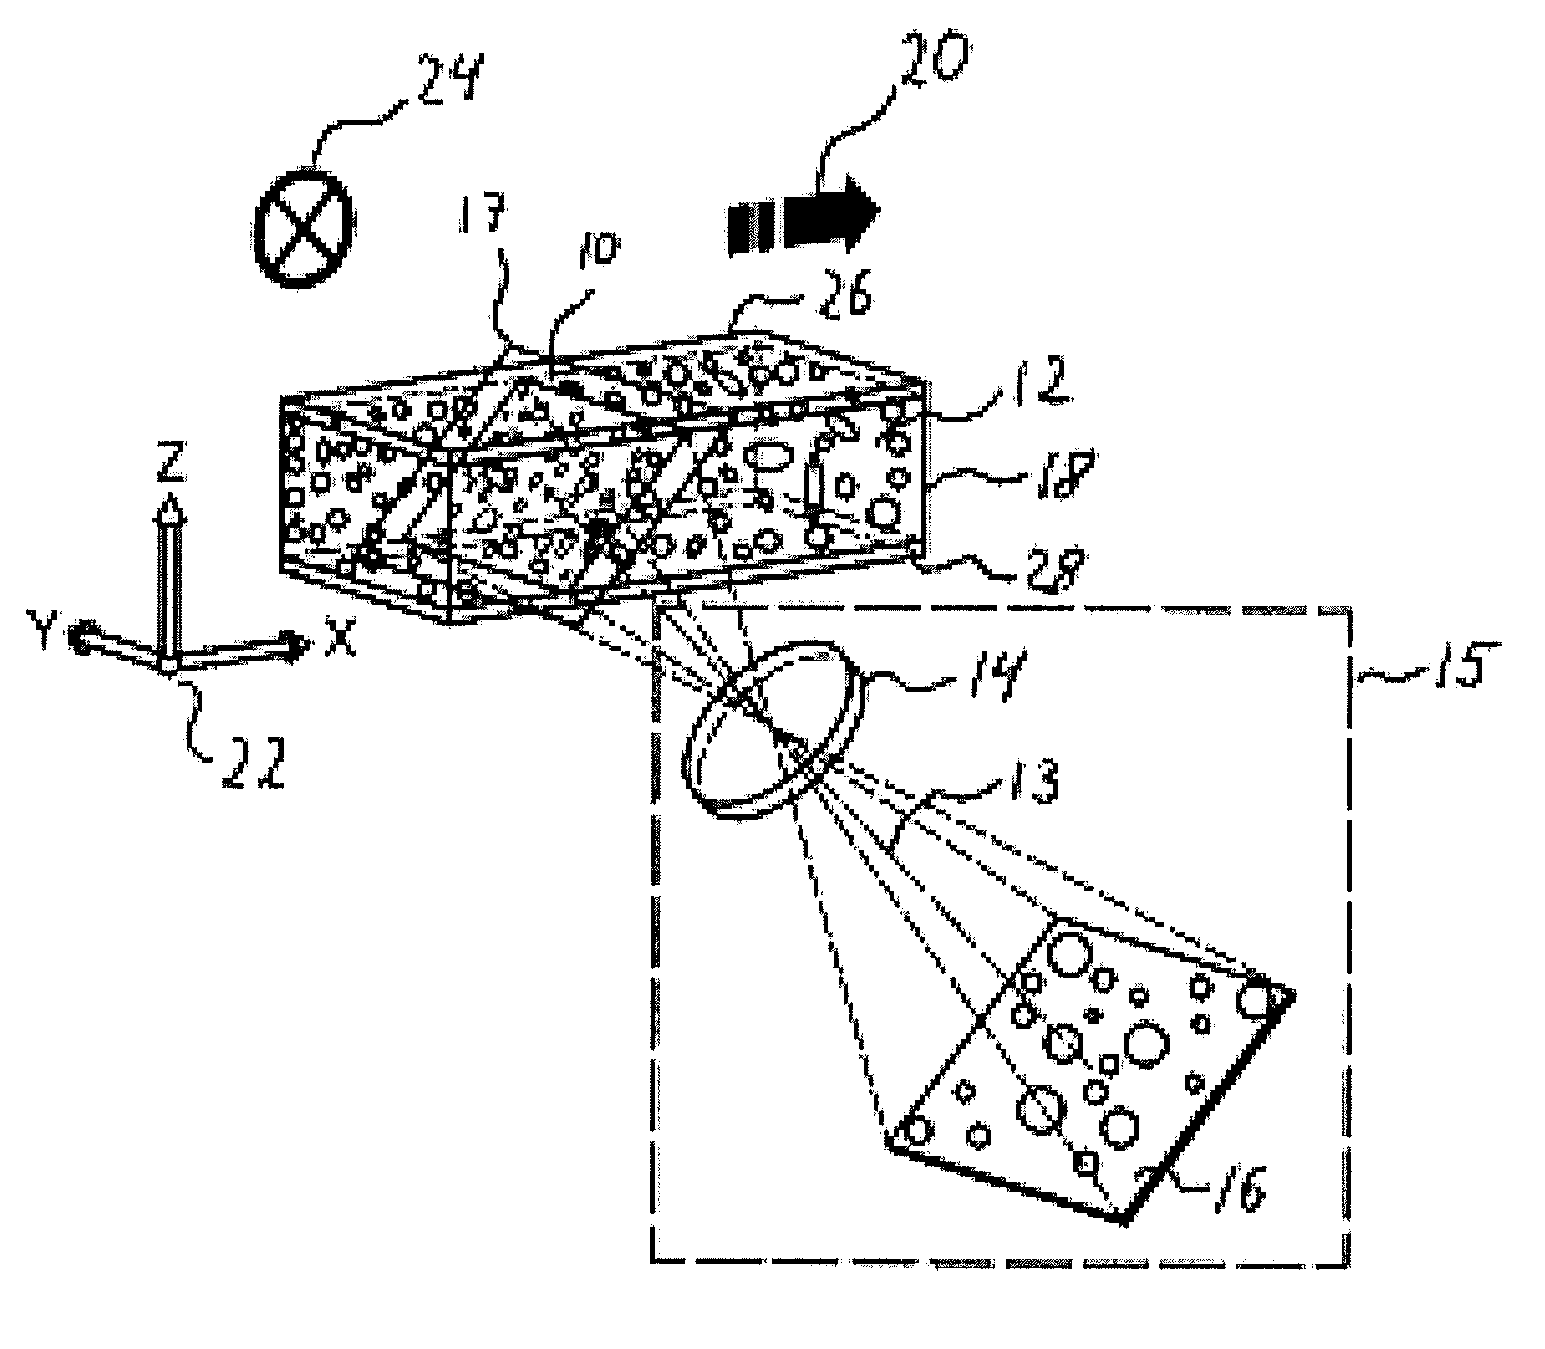 Optical sectioning of a sample and detection of particles in a sample